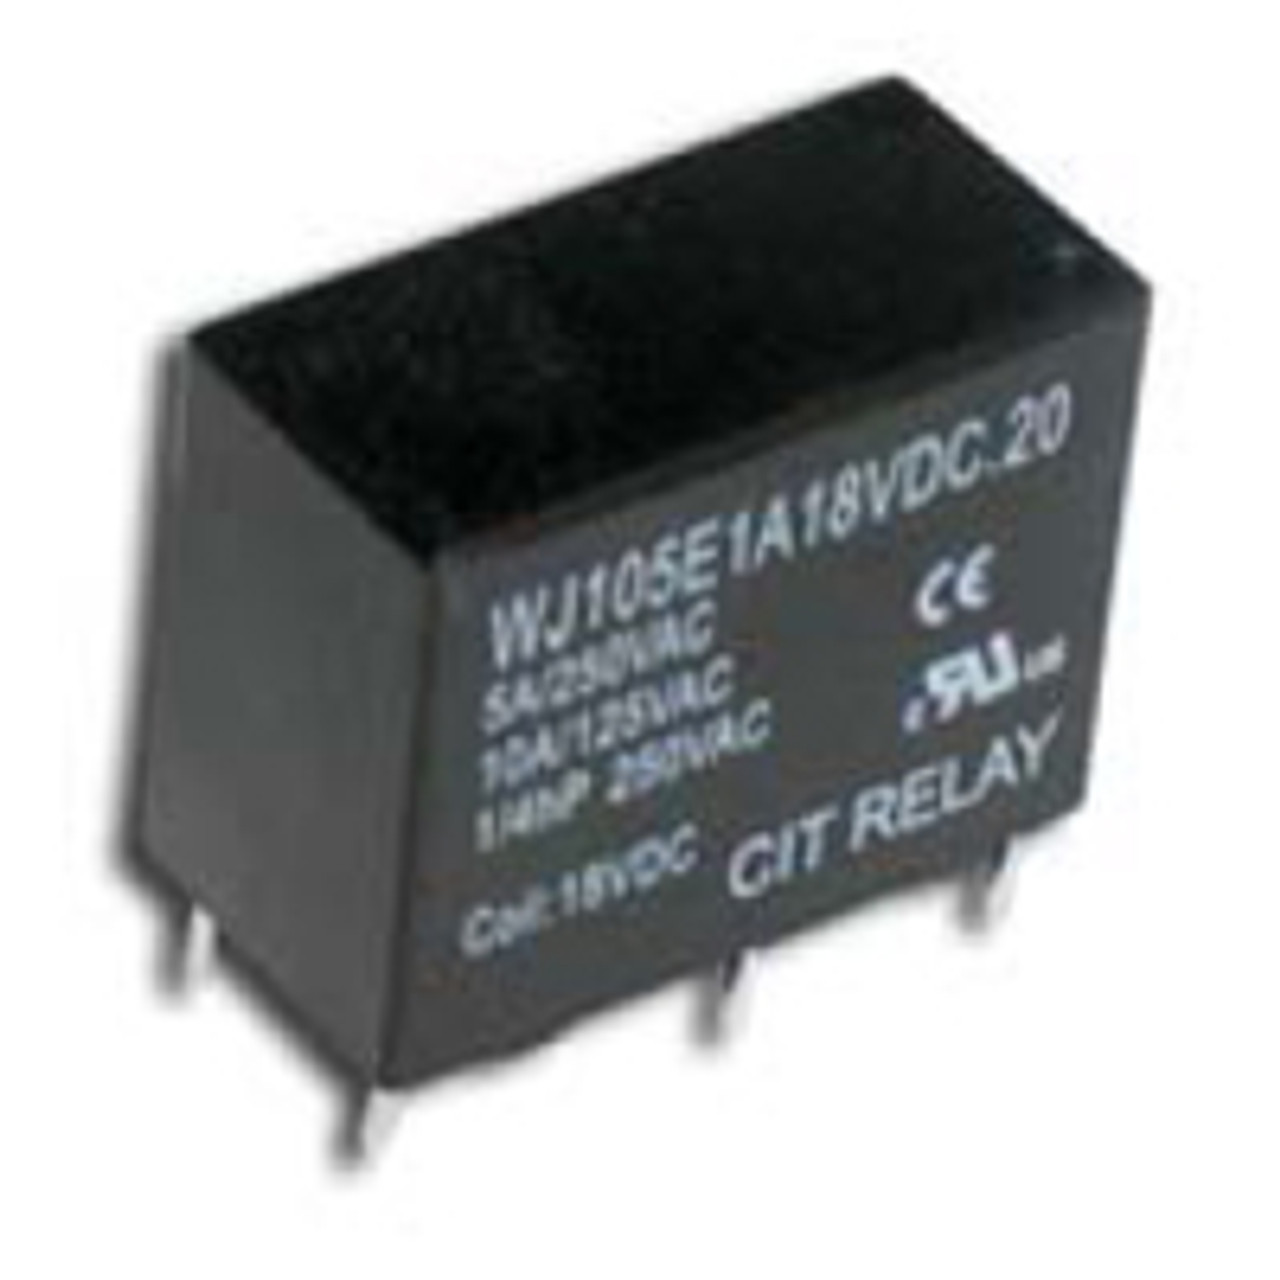 CIT Relay and Switch J105E1C5VDC.45 General Purpose Relays